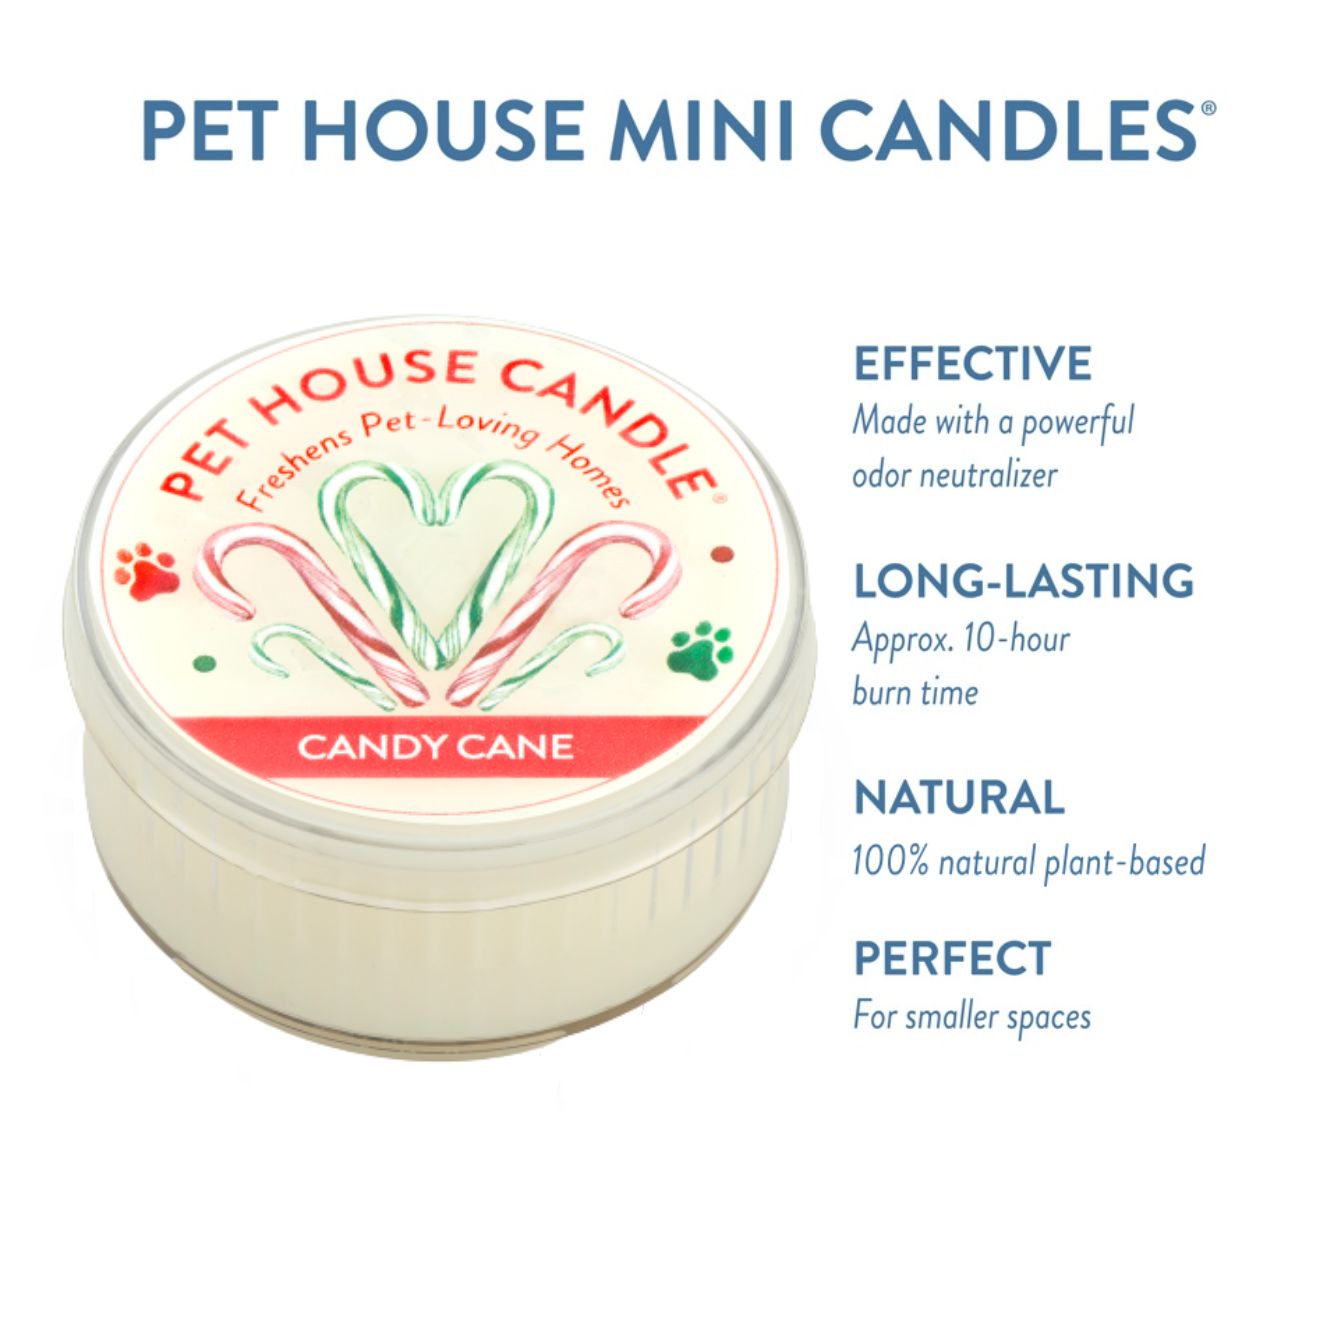 Candy Cane Mini Candle Infographics